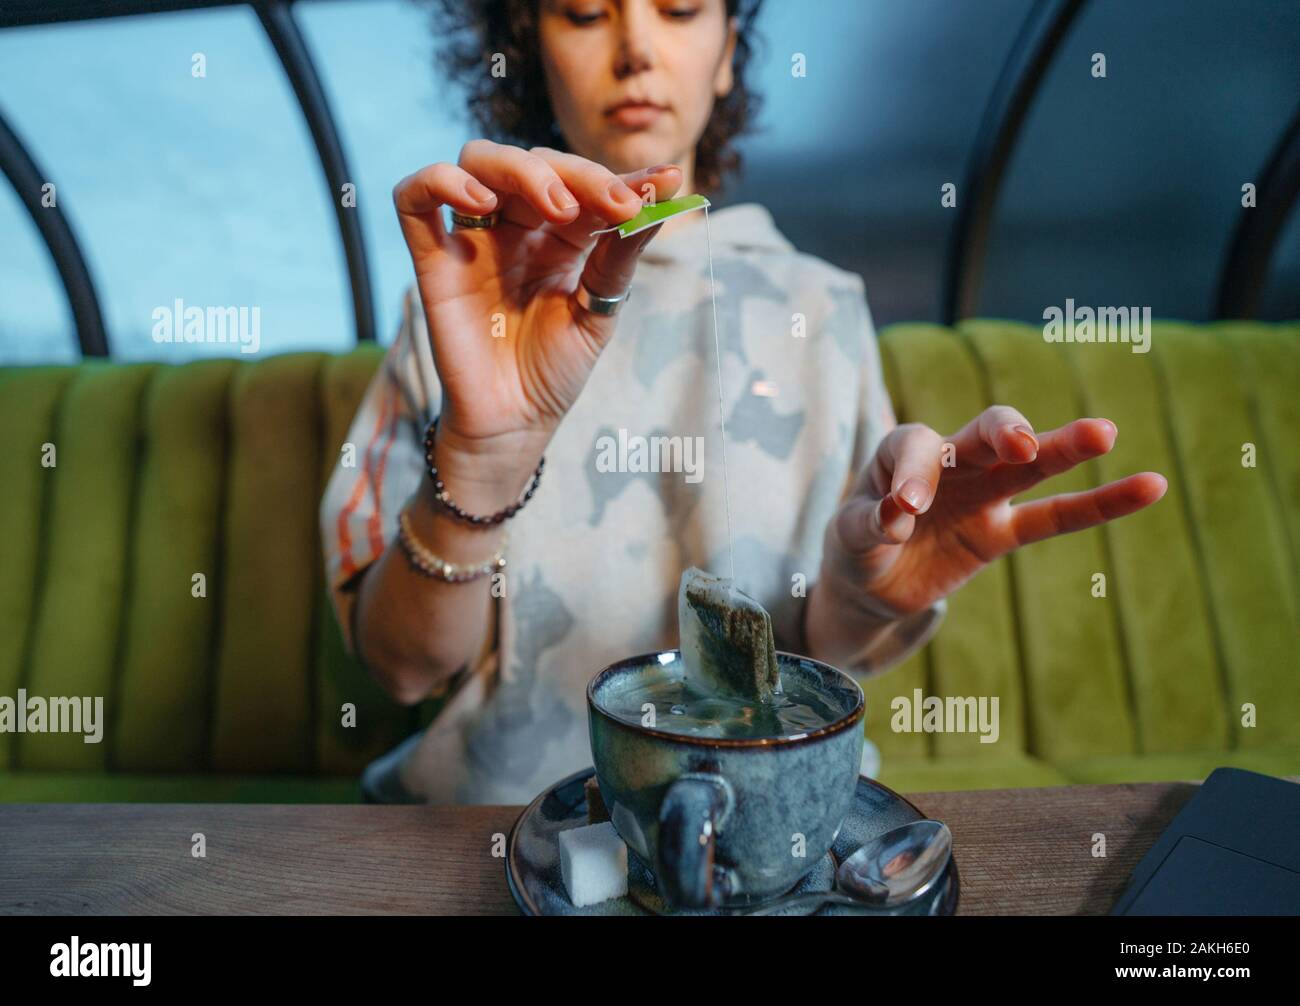 Woman brewing a fresh mug of tea with teabag in a cafe Stock Photo